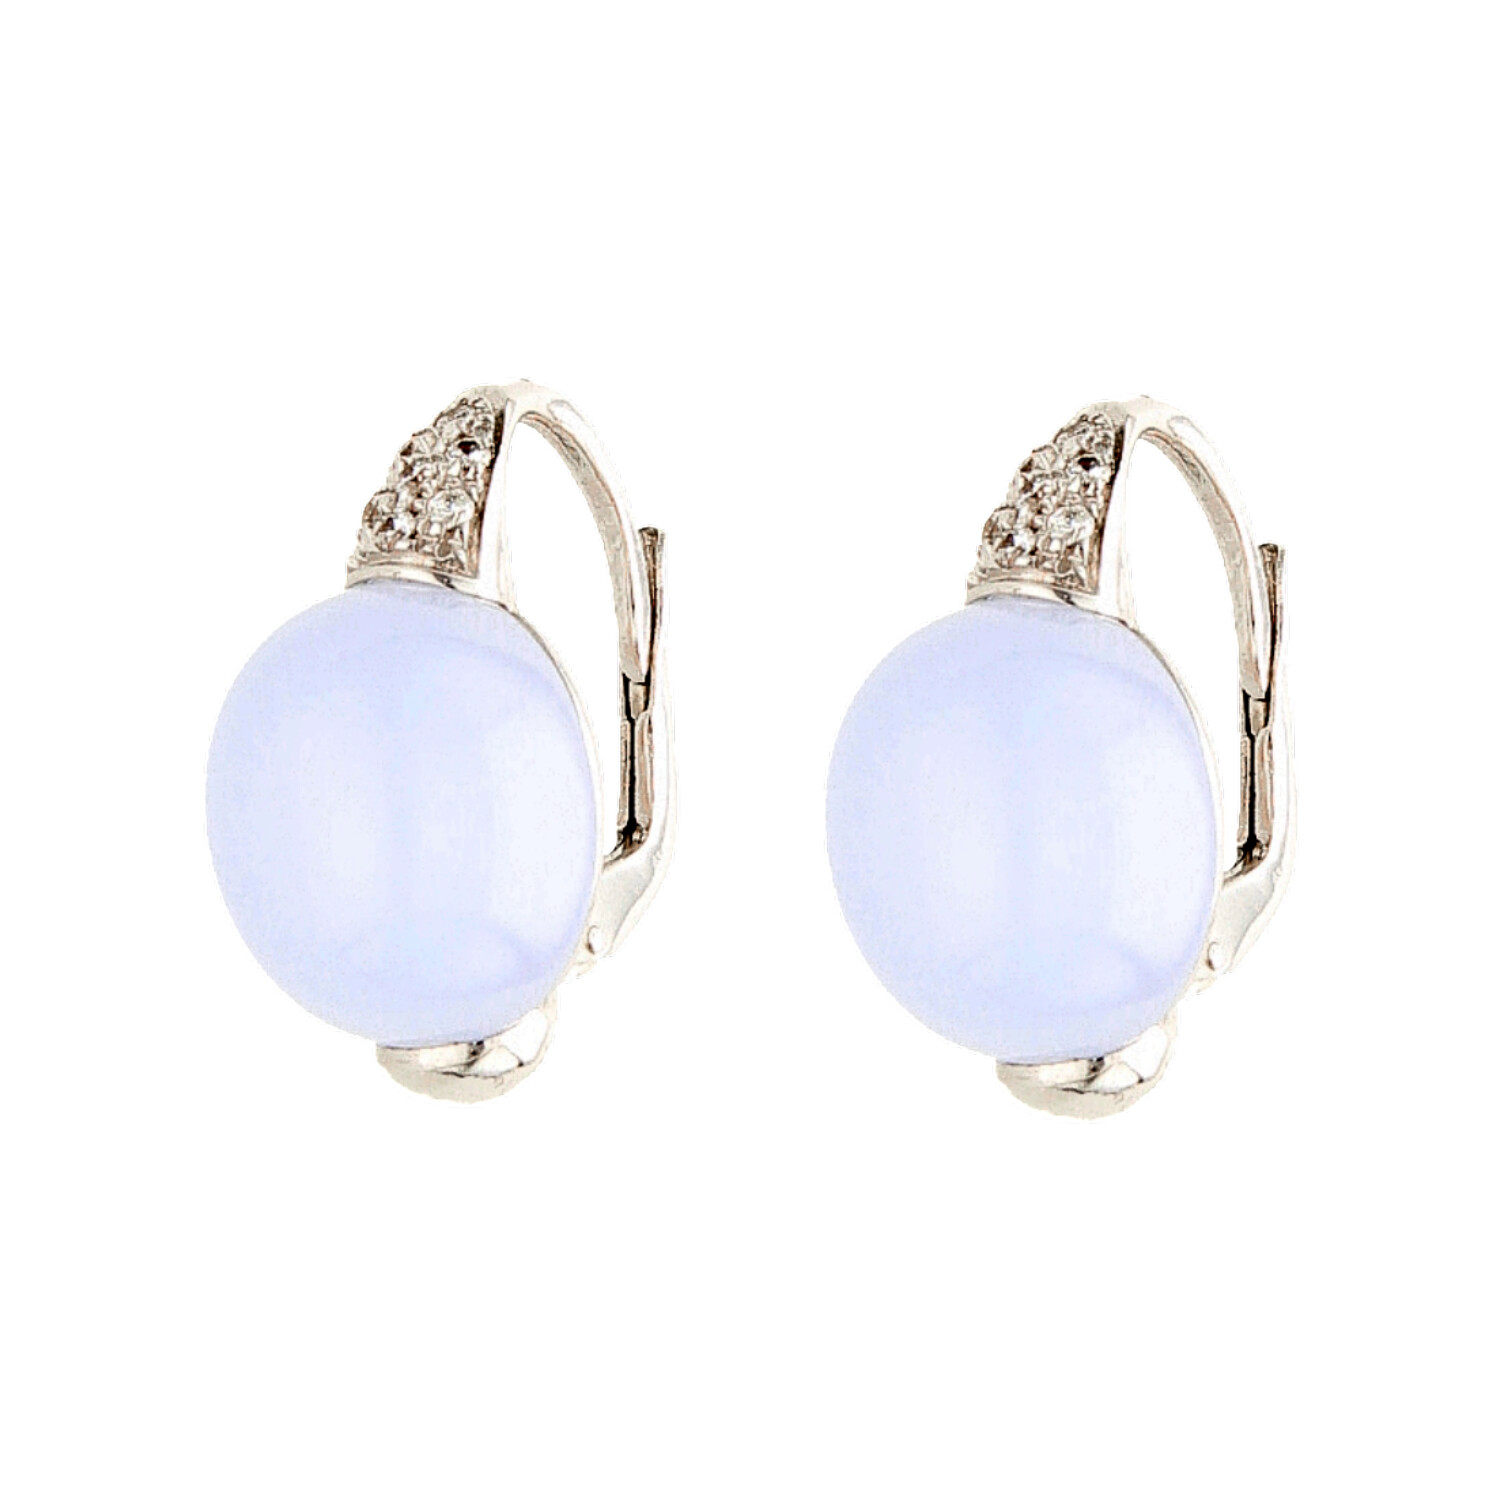 White gold earrings with moon stone